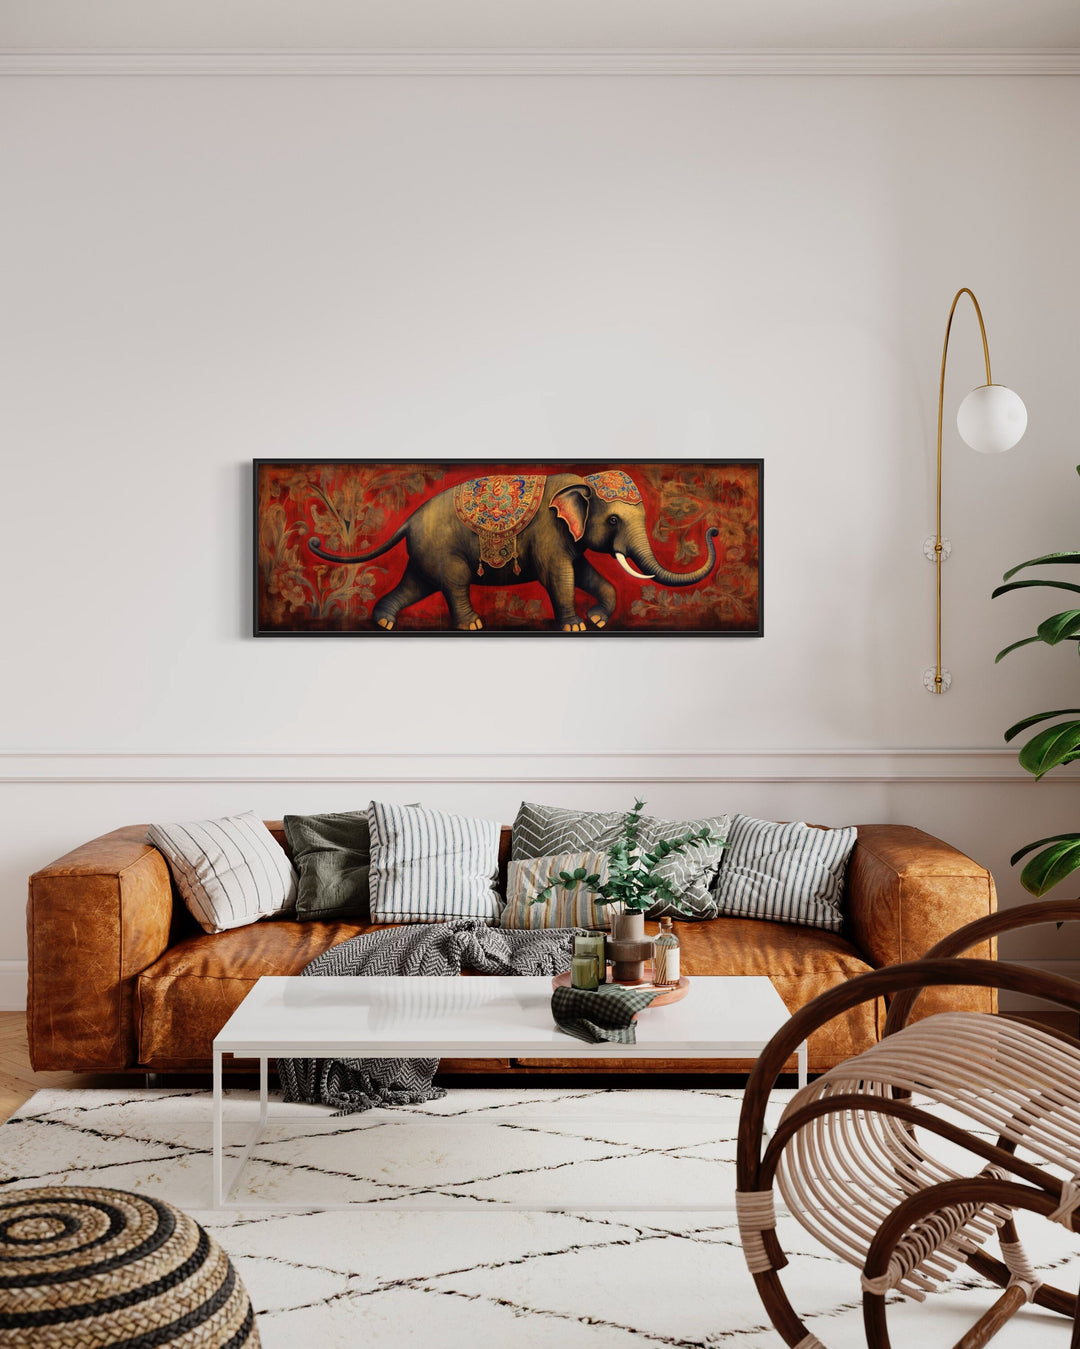 Indian Elephant Traditional Panoramic Wall Art "Majestic Elephant Parade" over brown couch